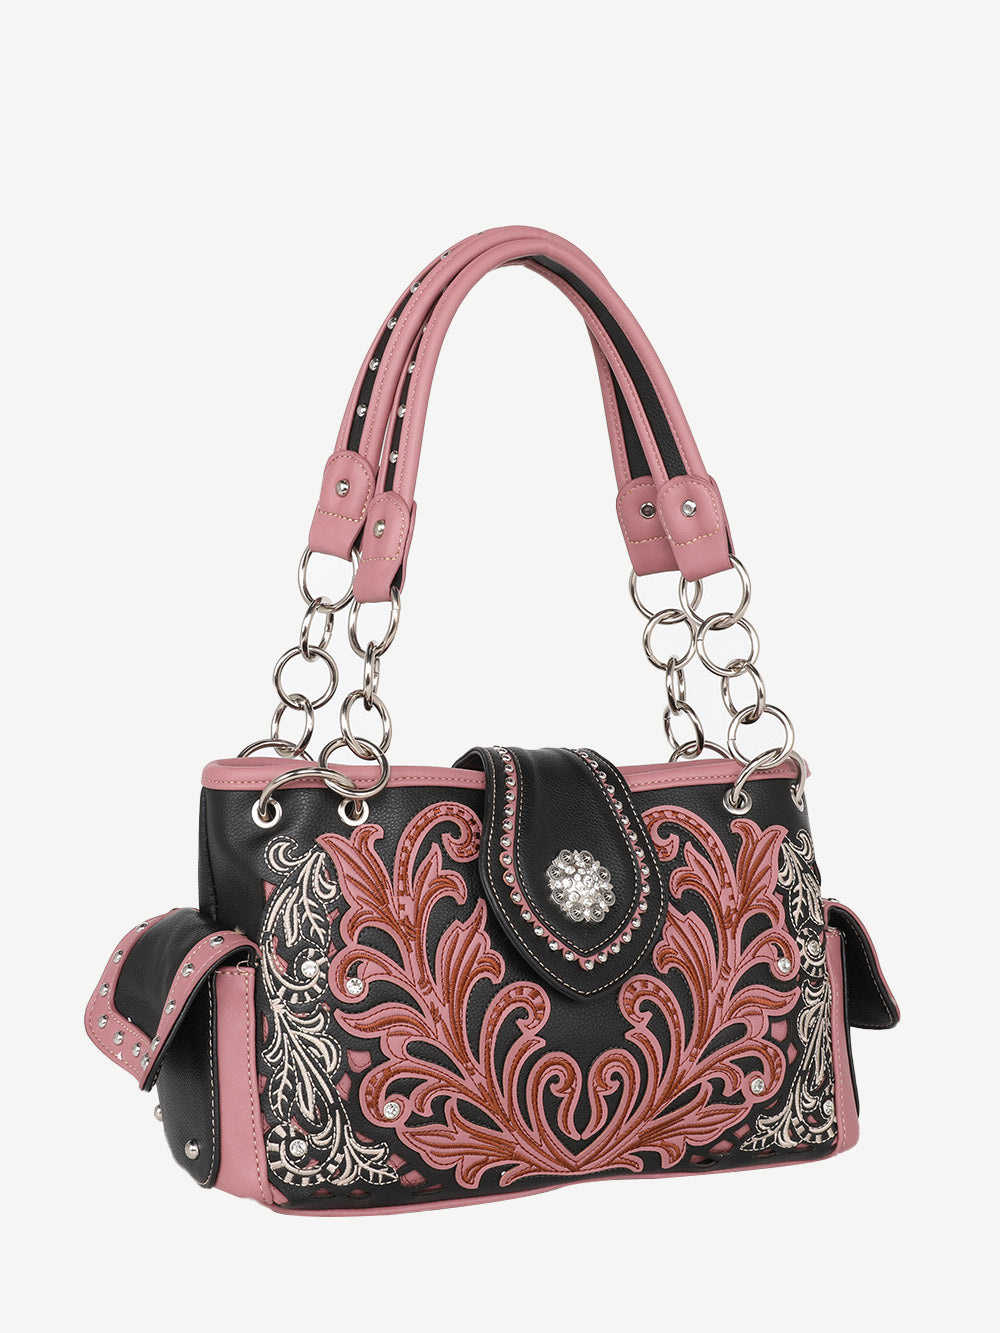 American Bling Black Embroidered Floral Satchel and Wallet Set - Montana West World